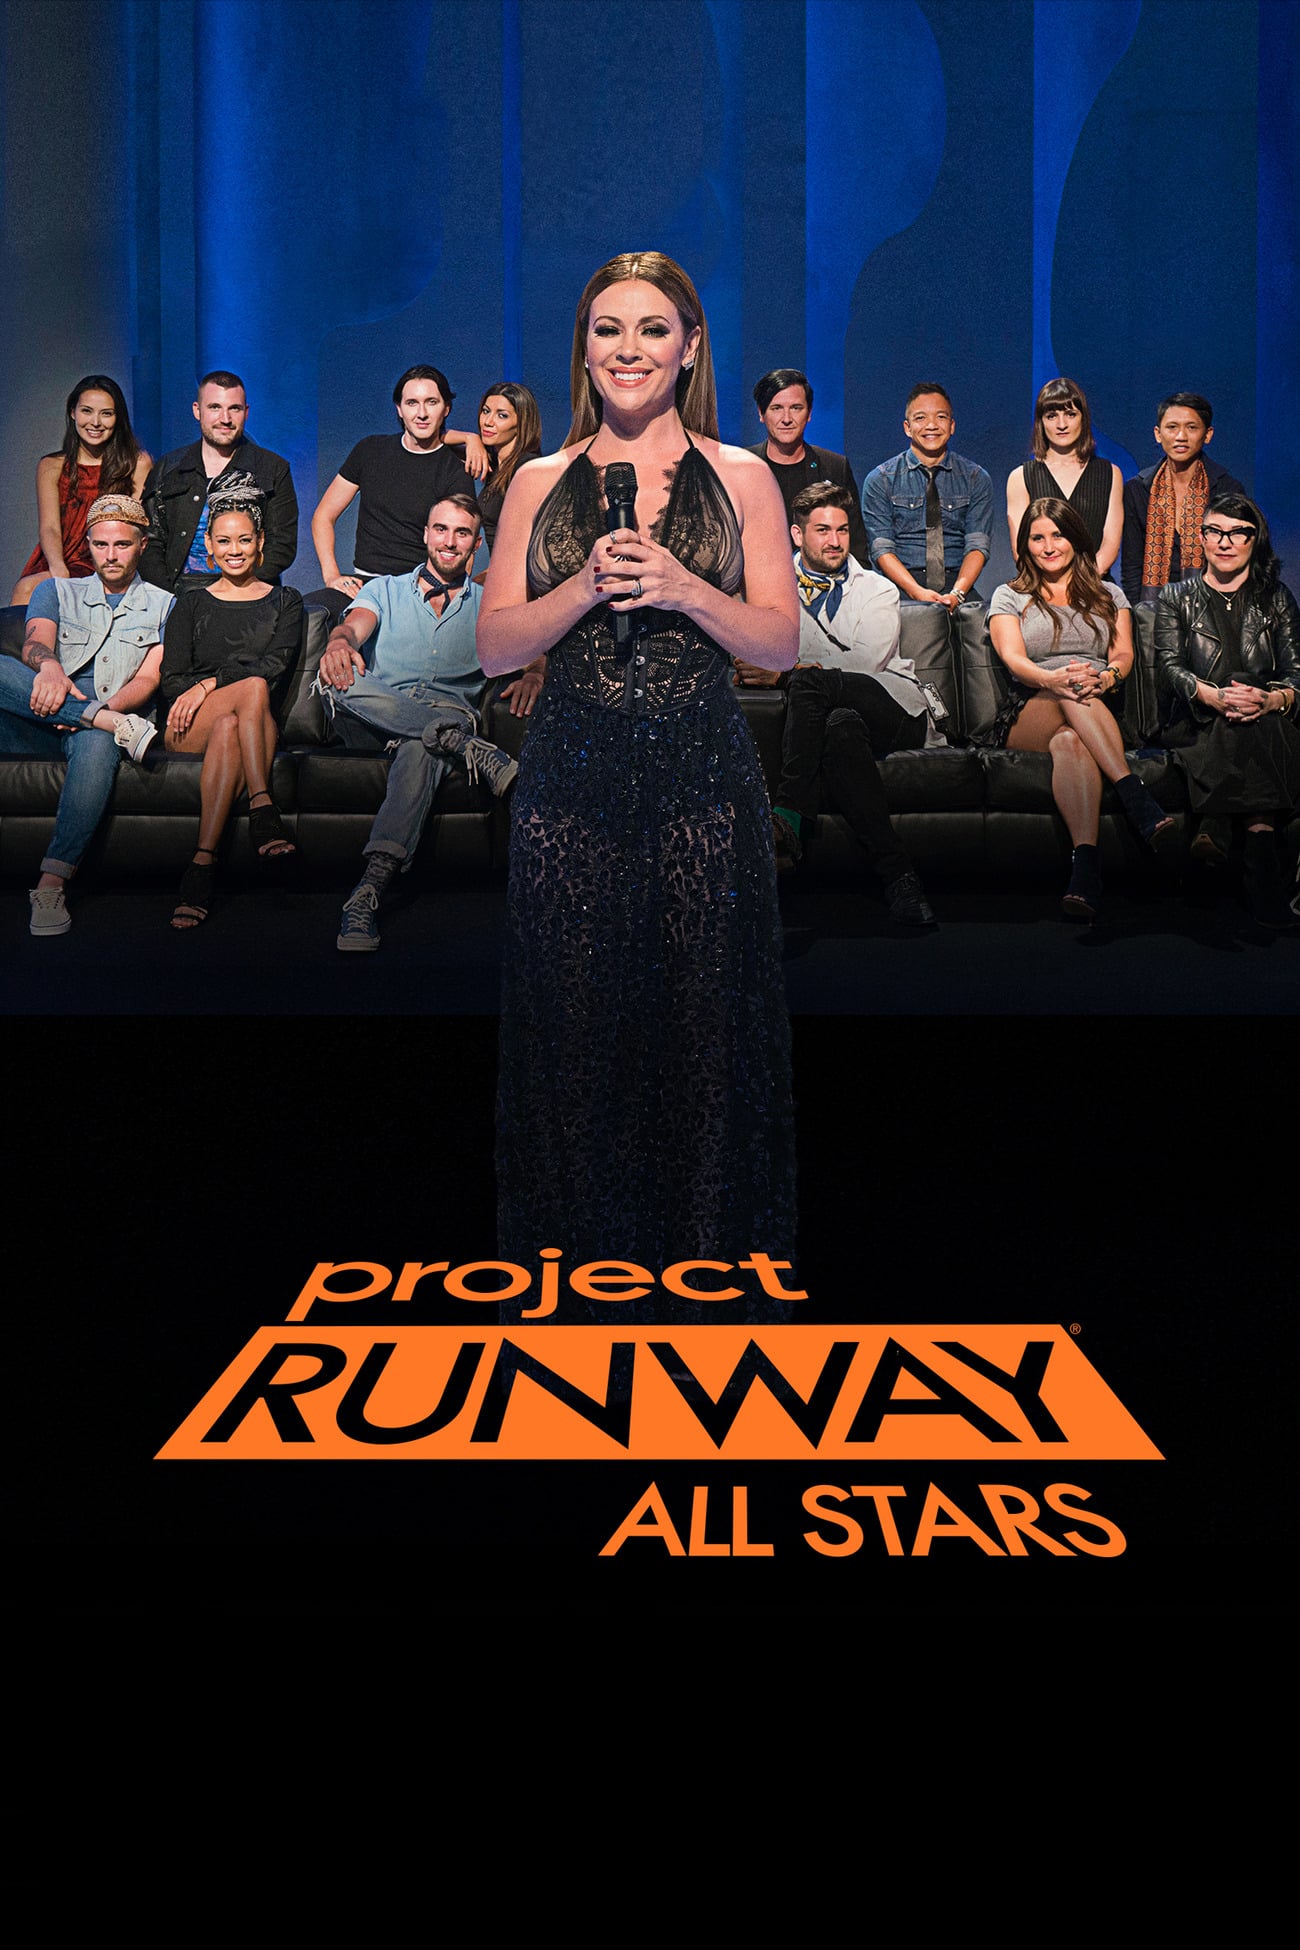 Season 8 of Project Runway All Stars Won't Be on Lifetime's Schedule